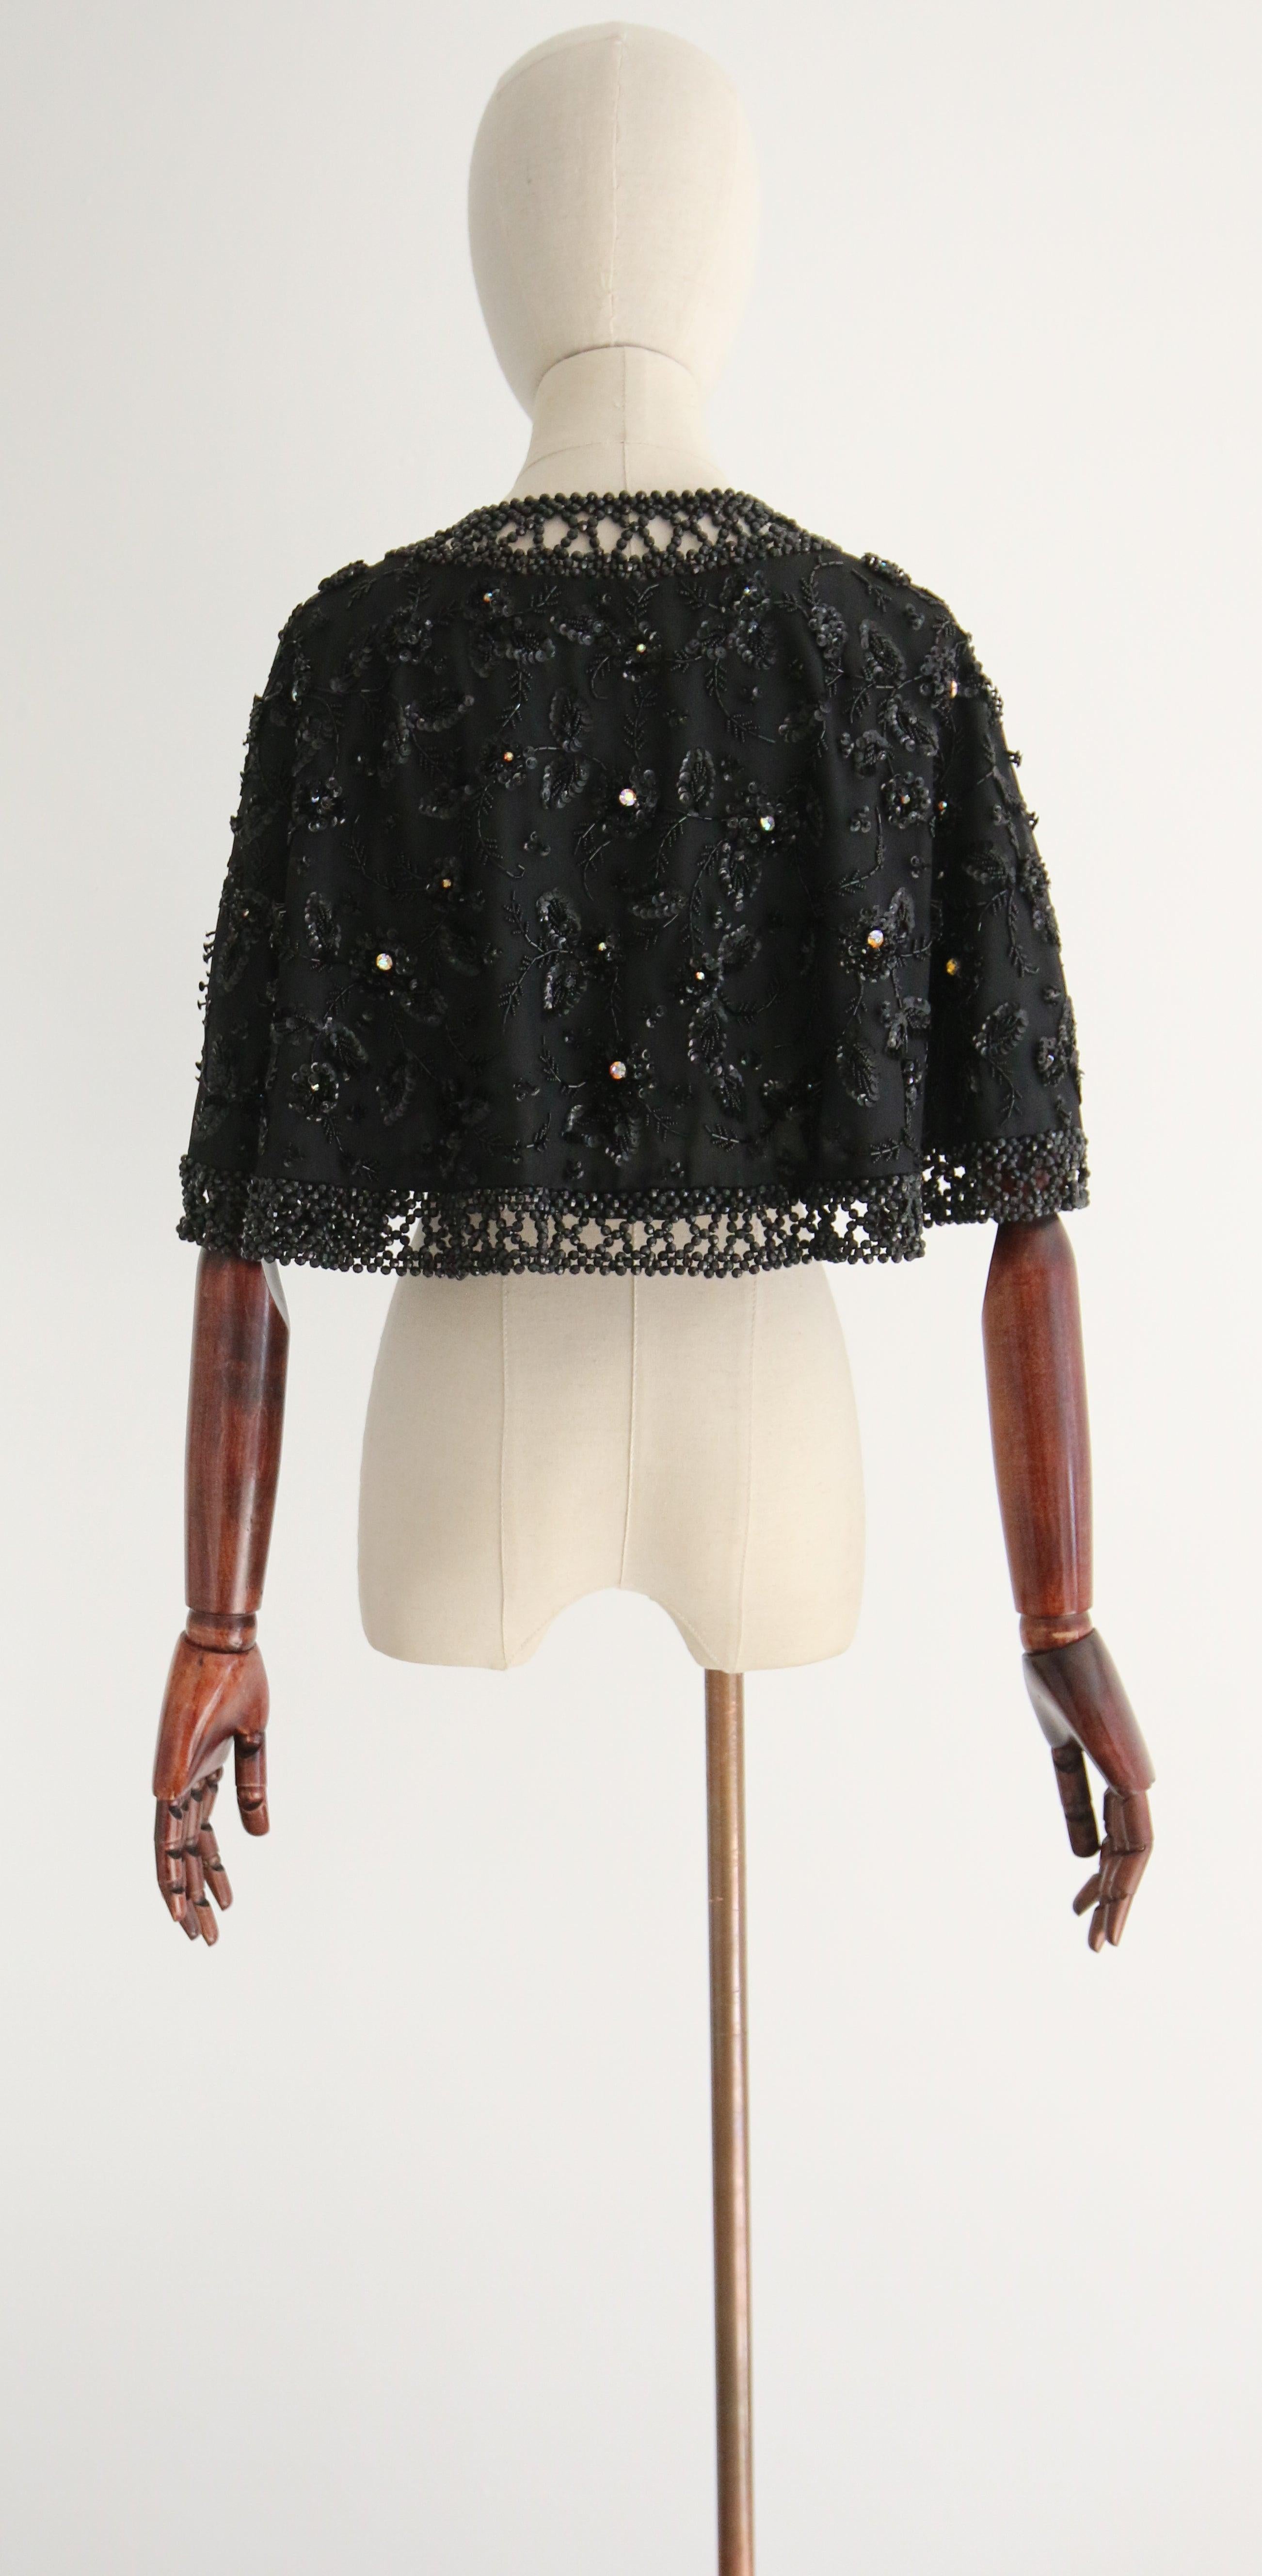 Vintage 1960's Black Beaded and Rhinestone Floral Evening Cape For Sale 7